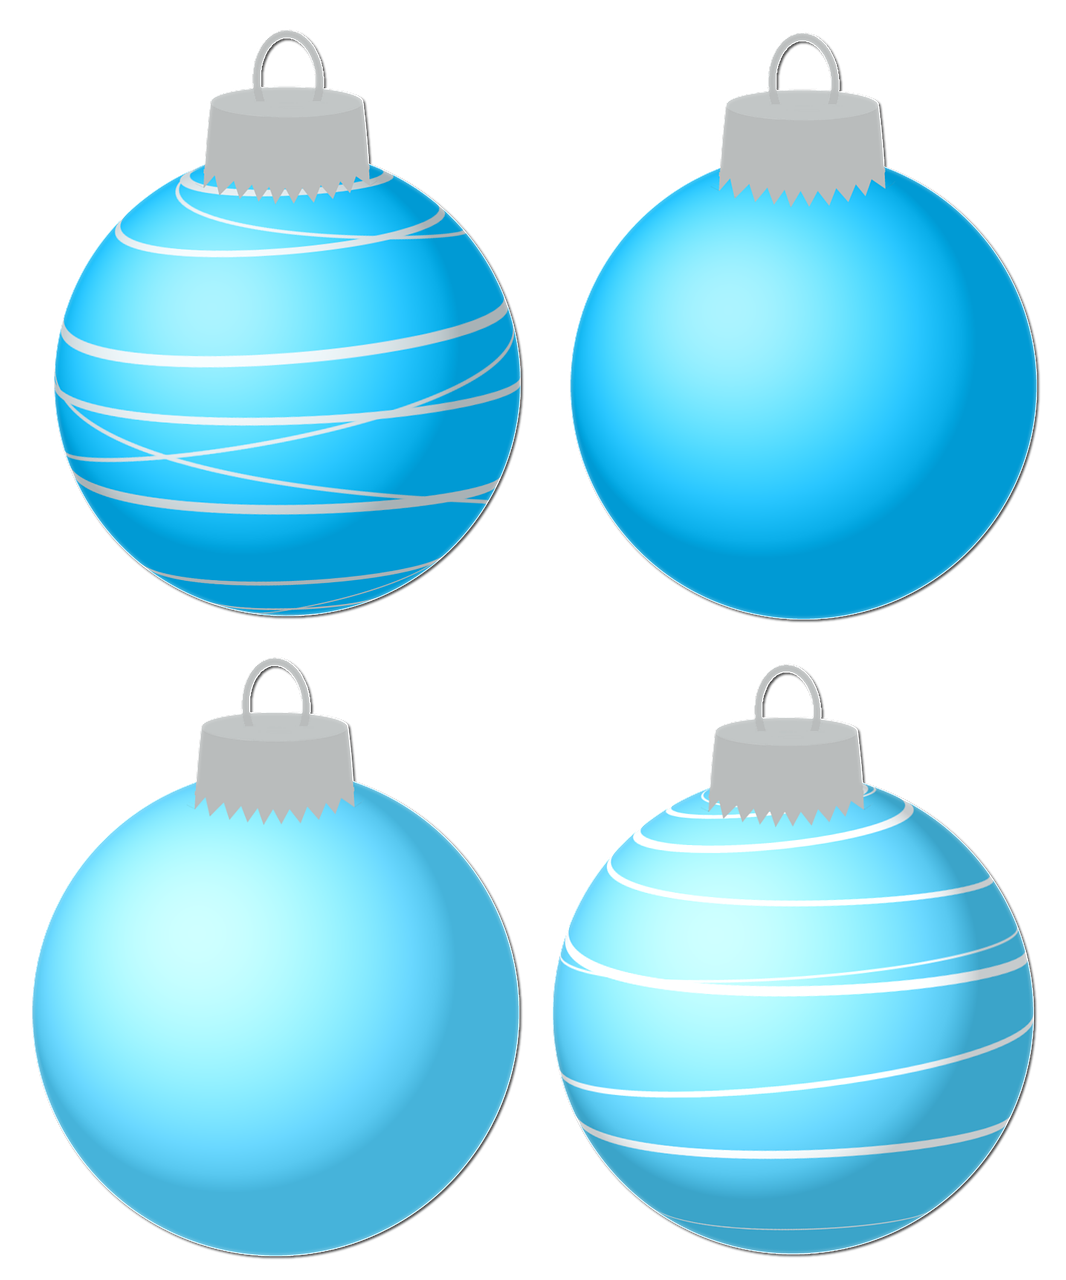 bauble christmas baubles ornament free photo